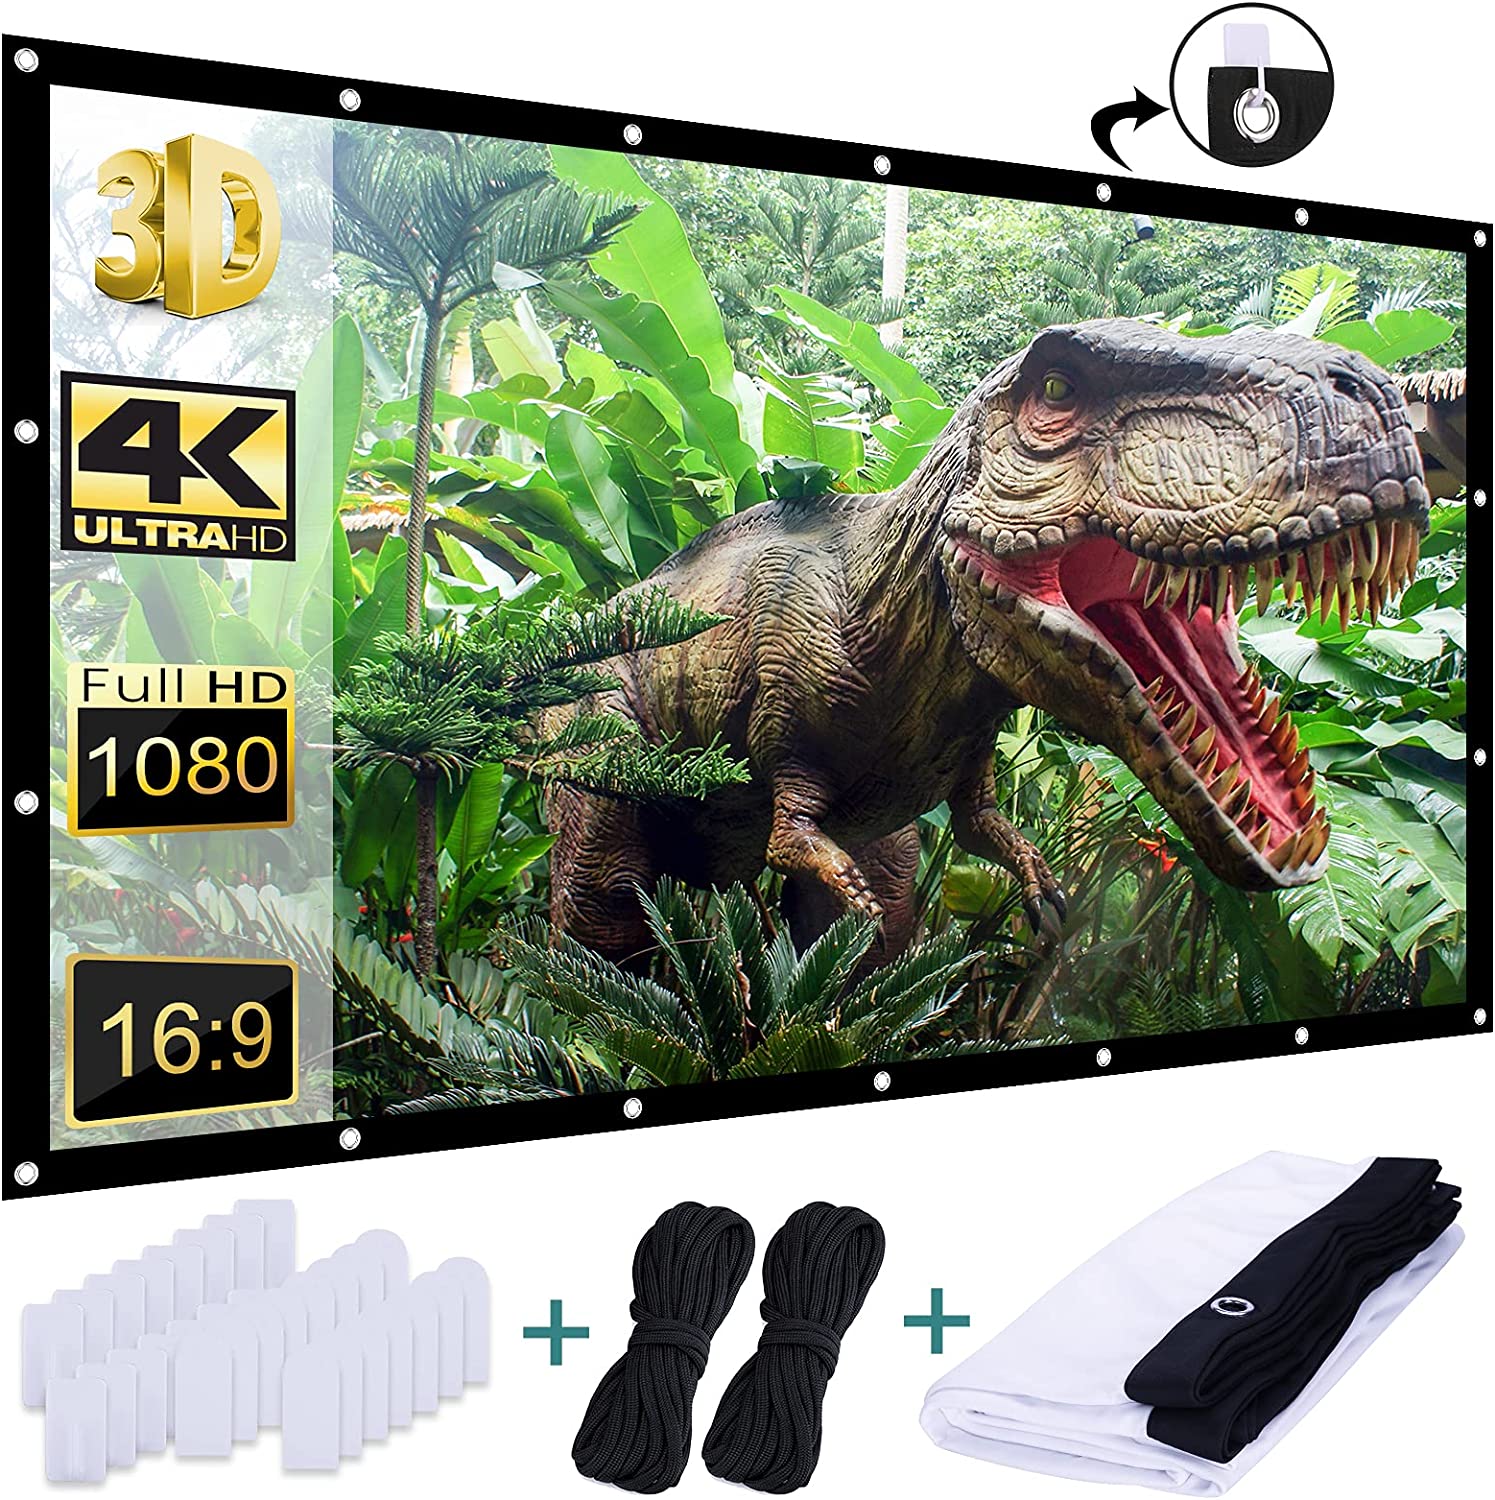 Outdoor Projection Screen 150 inch, Washable 4K Projector Screen 16-9 HD Foldable Anti-Crease Portable Projector Movies Screen for Home Theater Outdoor